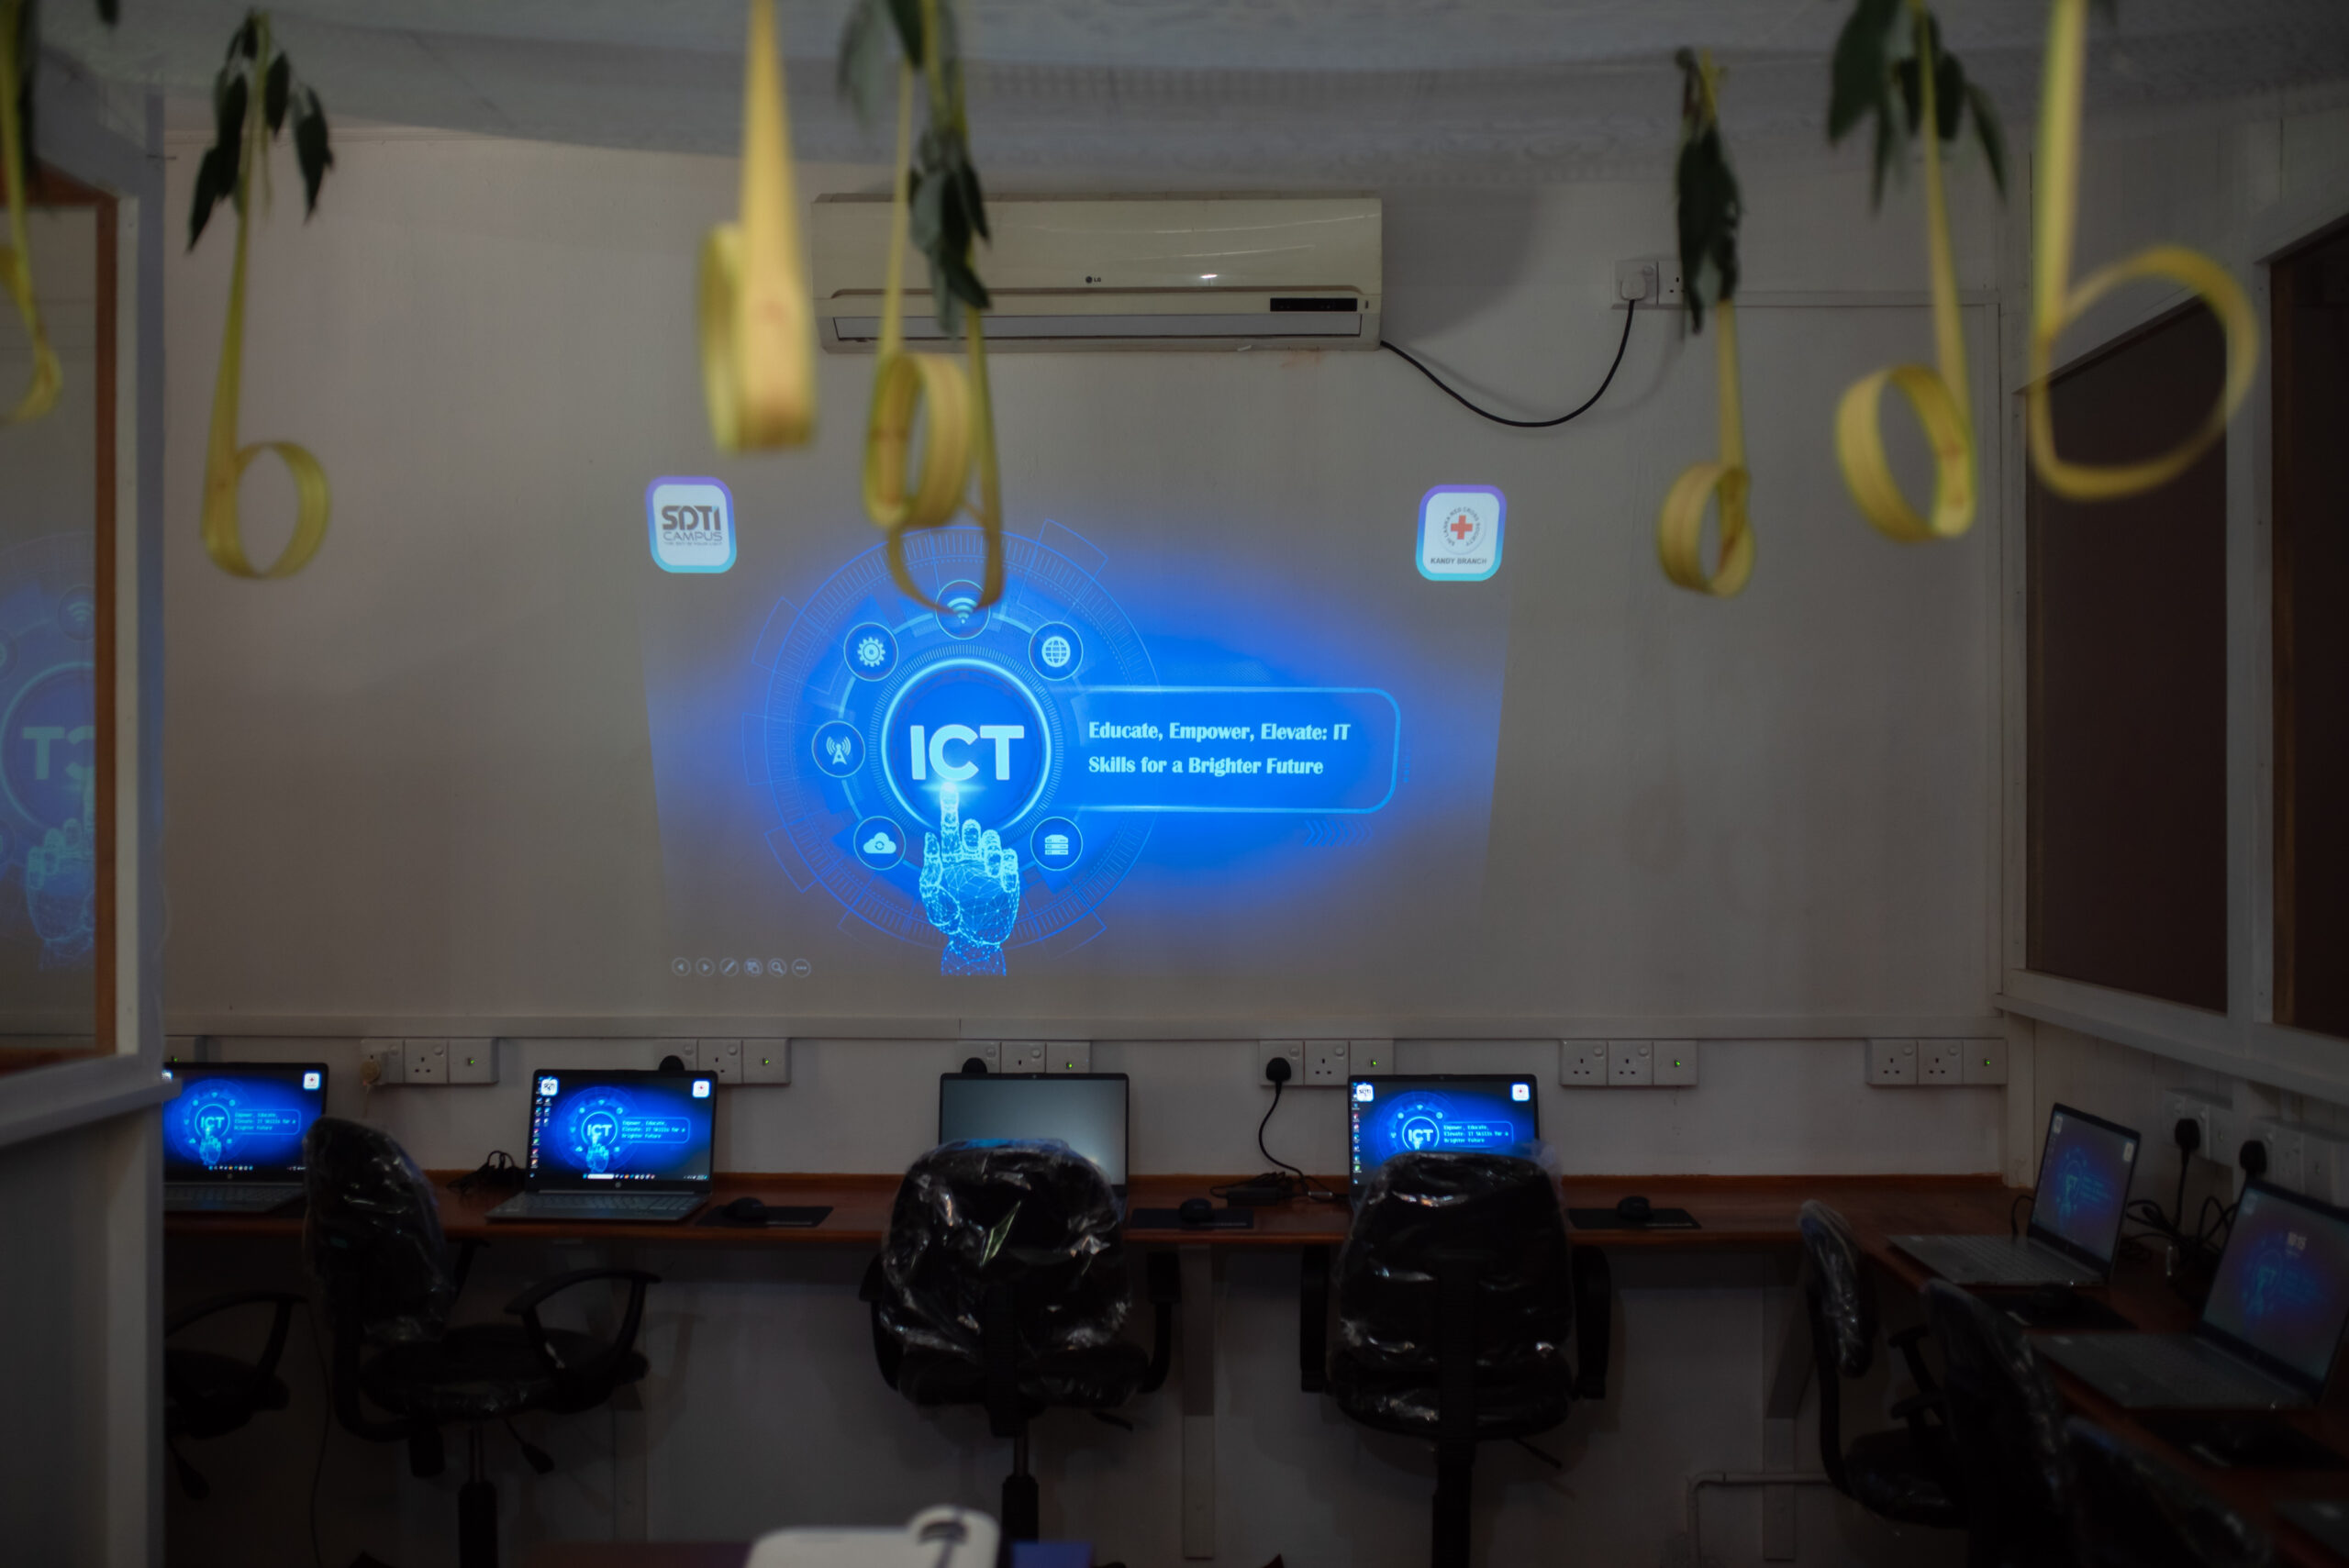 Sri Lanka Red Cross Society Inaugurates the First Computer Lab and IT Training Centre for the Marginalised Children and Youth